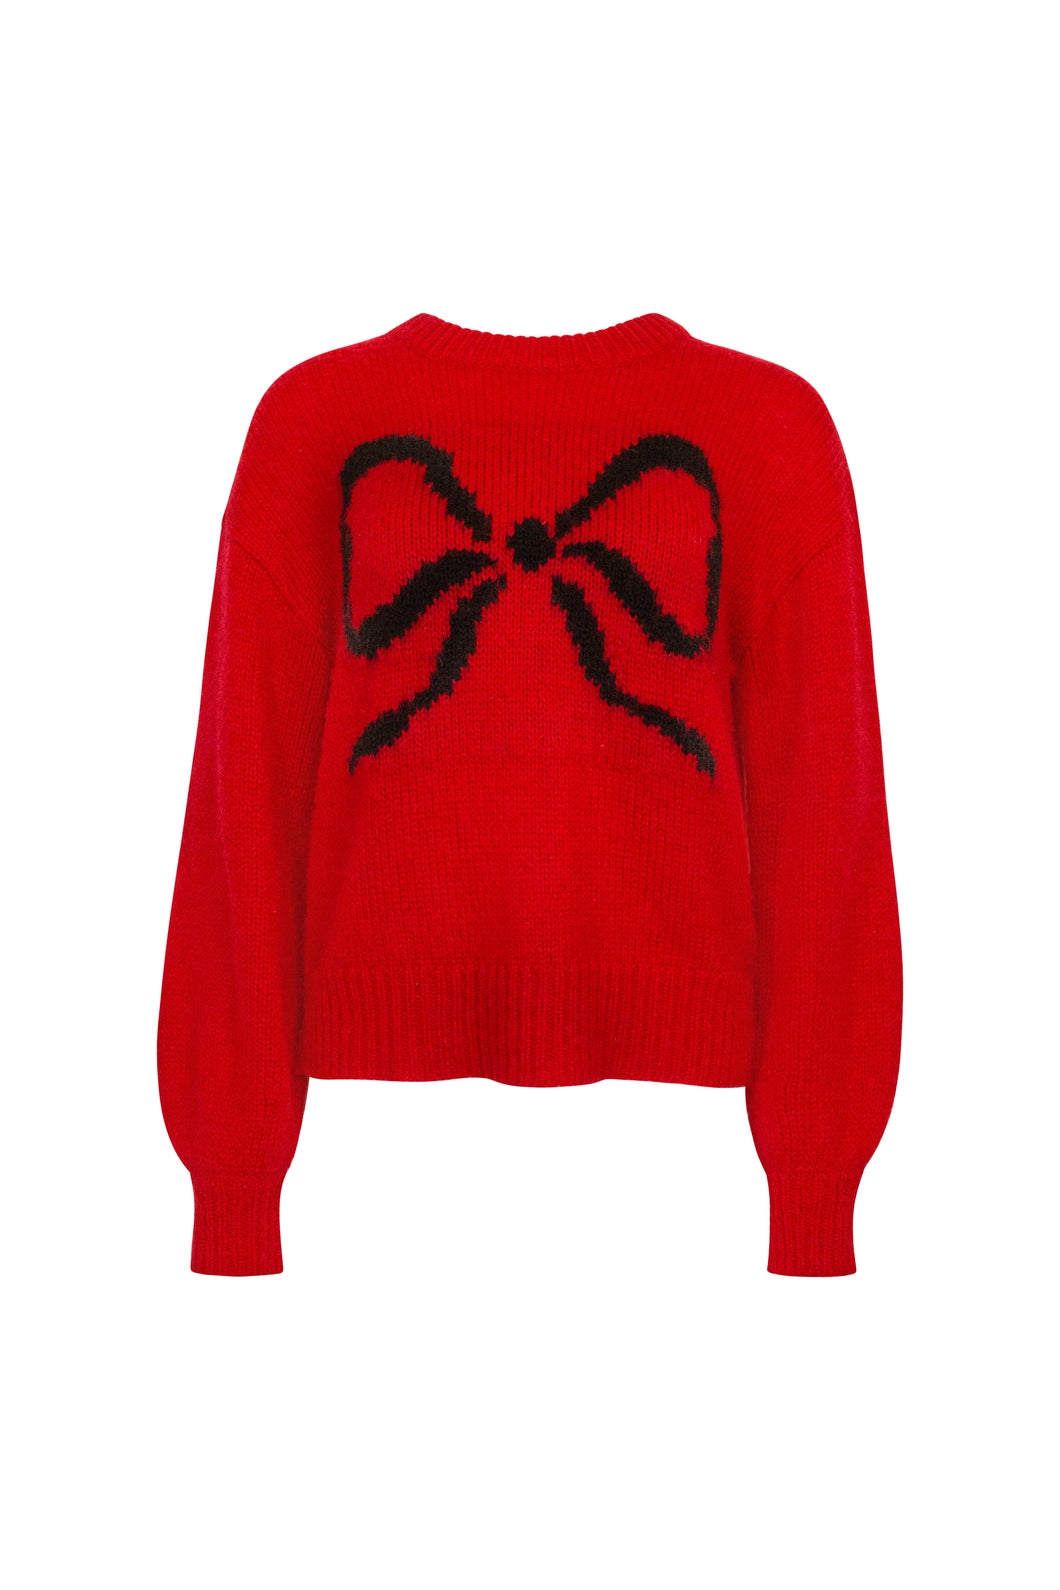 Red Bow Sweater